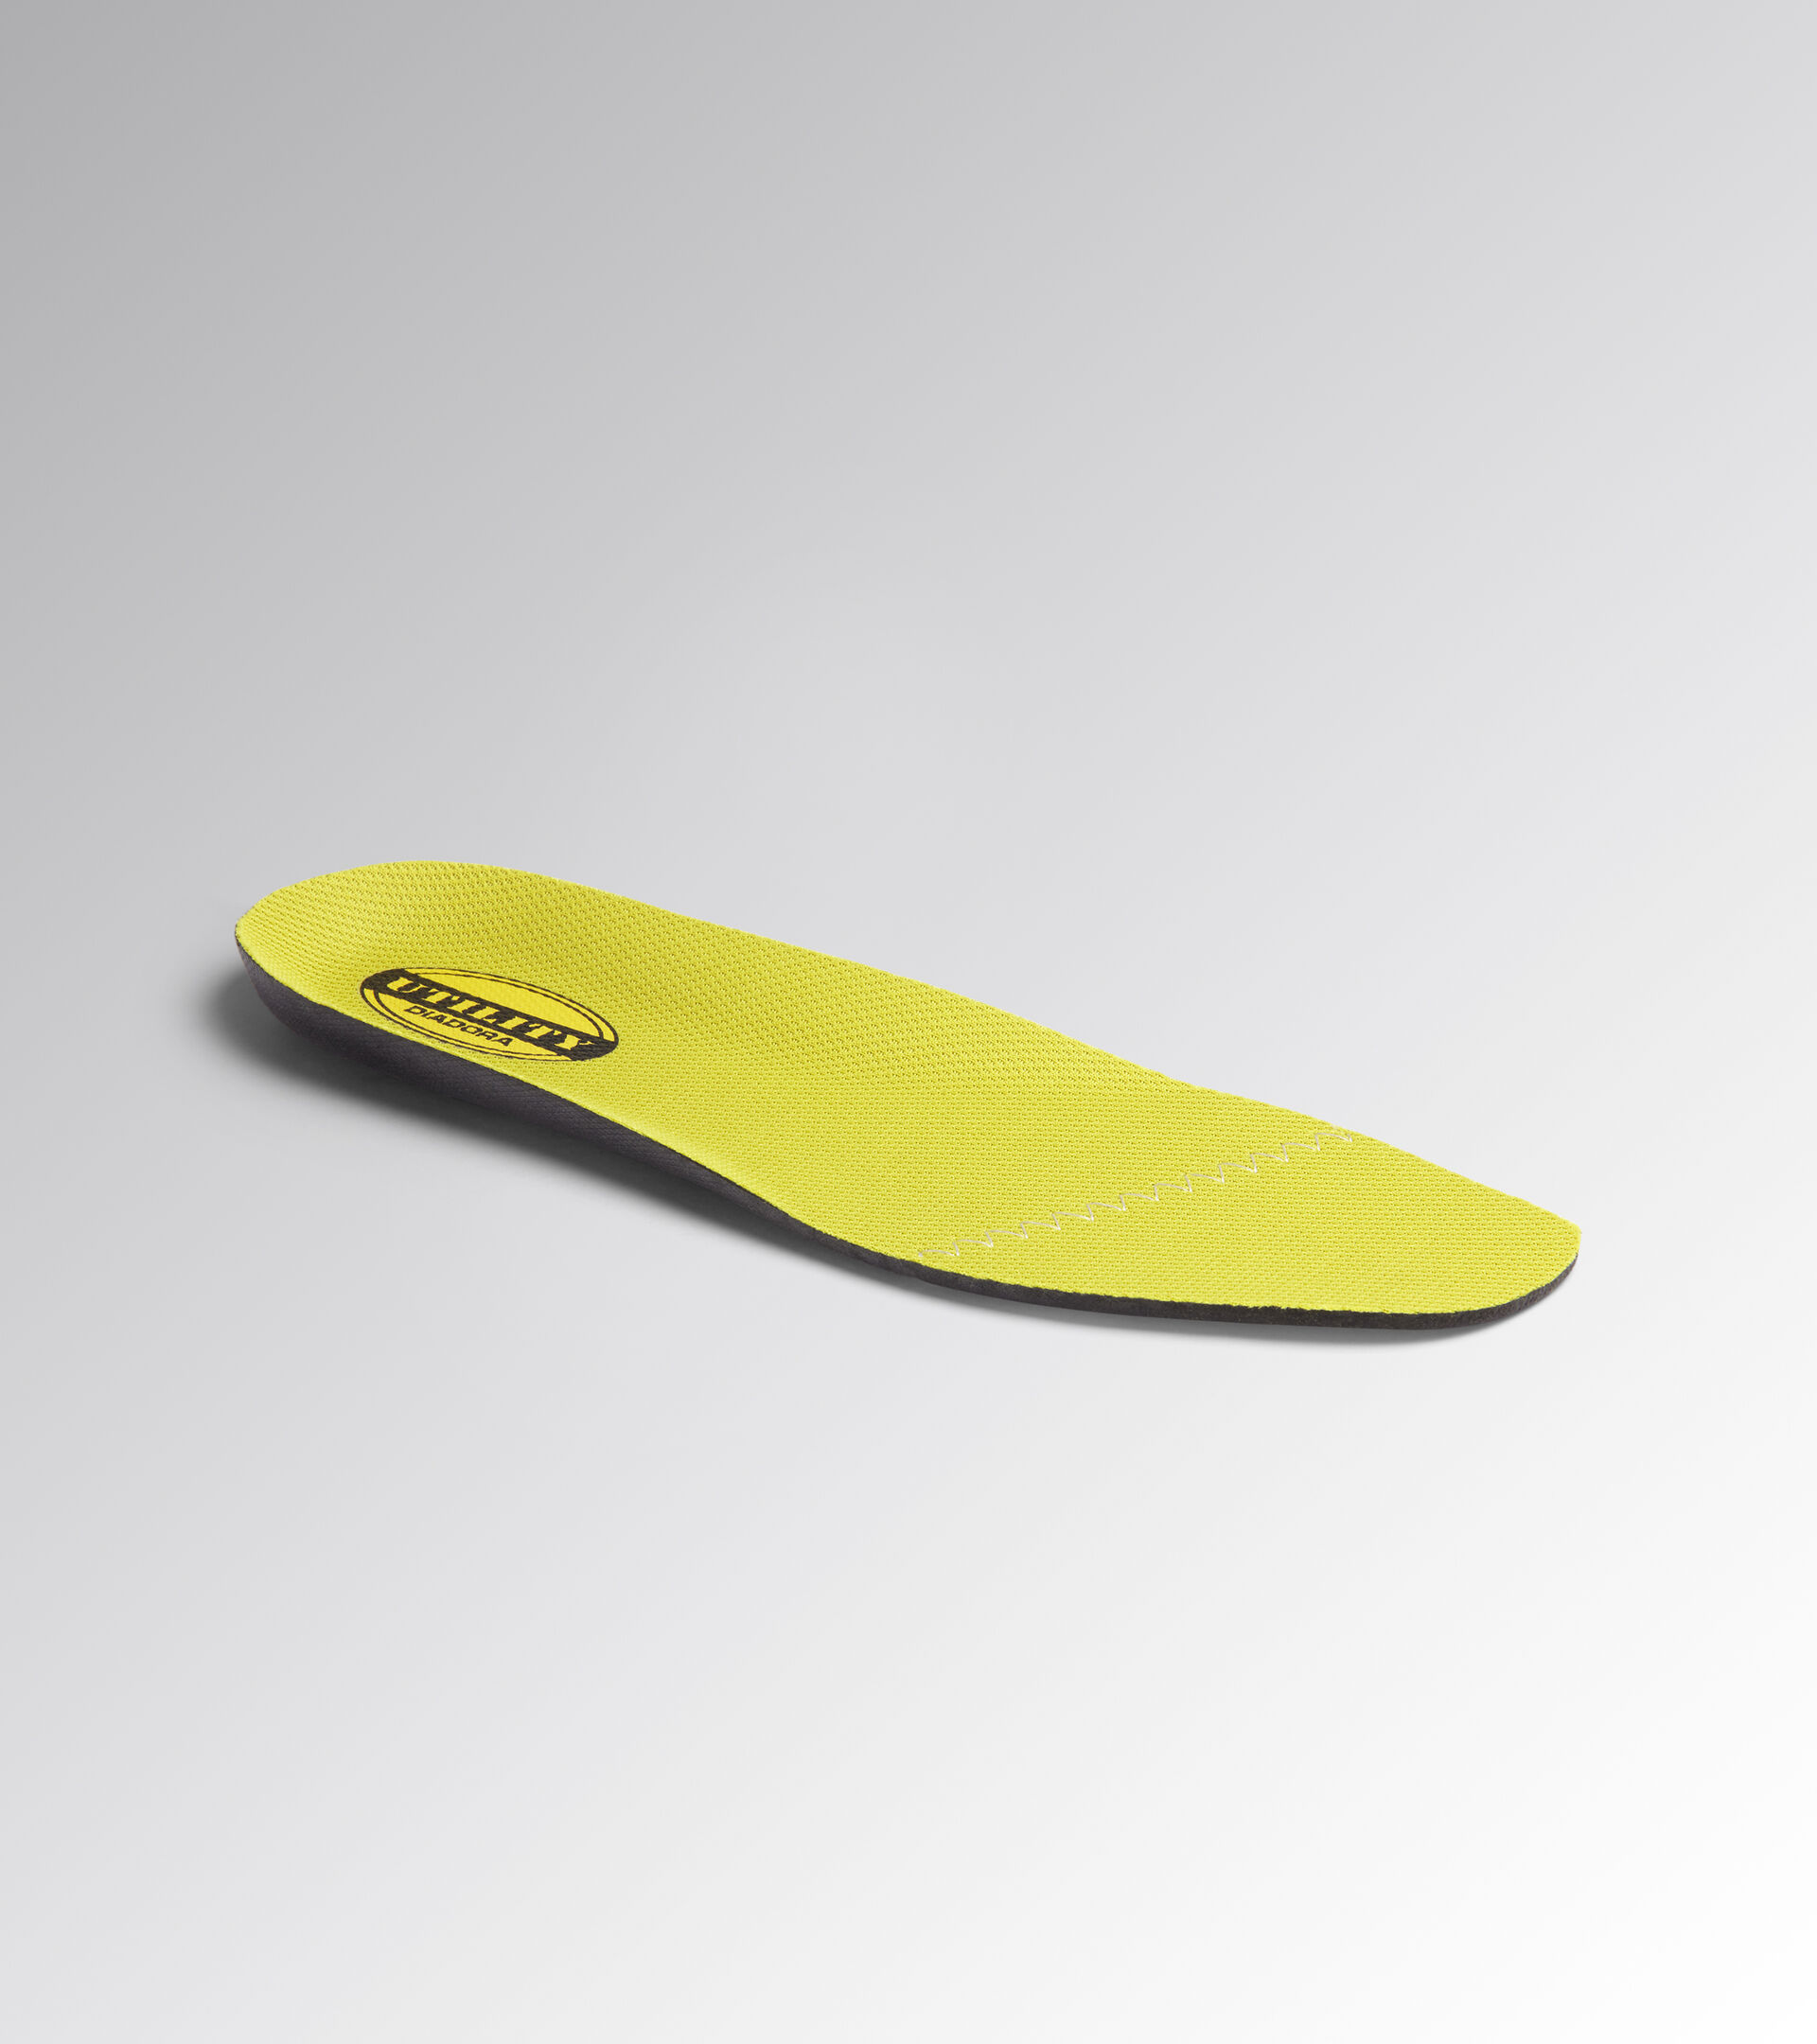 Insoles for Utility shoes INSOLE CUSHION BUTTERFLOWER YELLOW - Utility